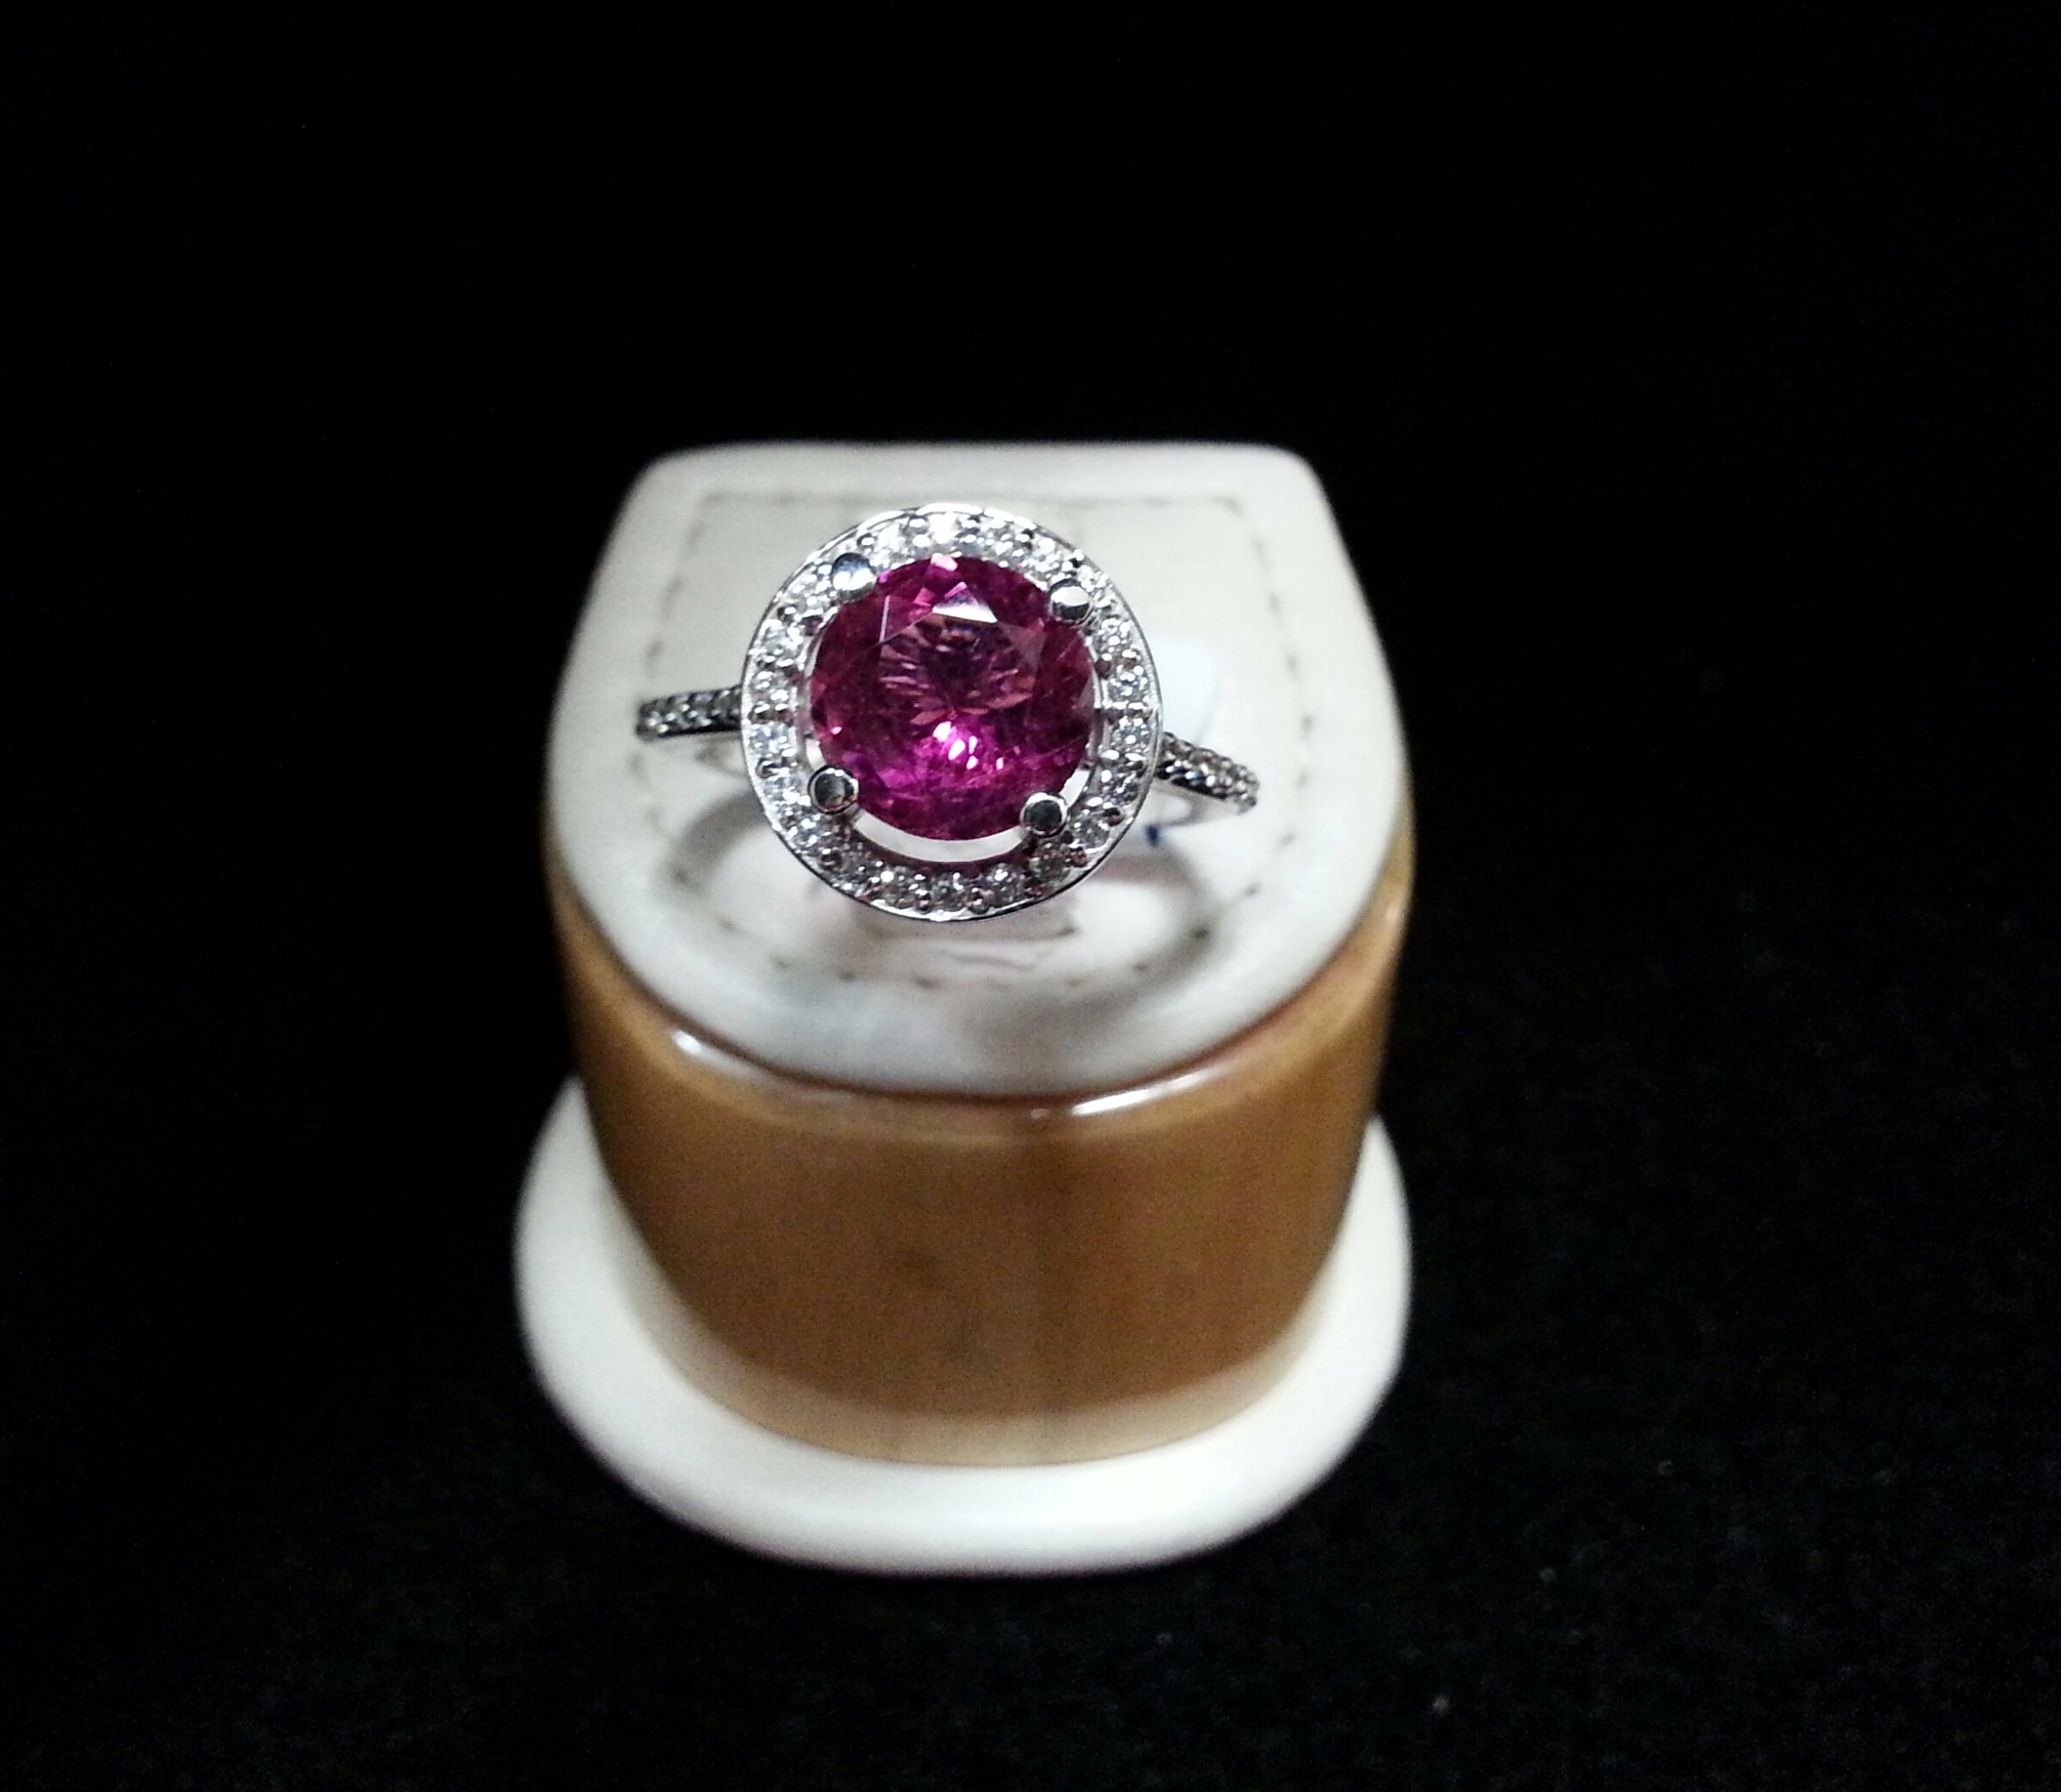 Diamond Halo Style 14k White Gold Mounting with Round Pink Tourmaline in Center. Tourmaline is 1.58ct with 0.26ctw of Diamonds.